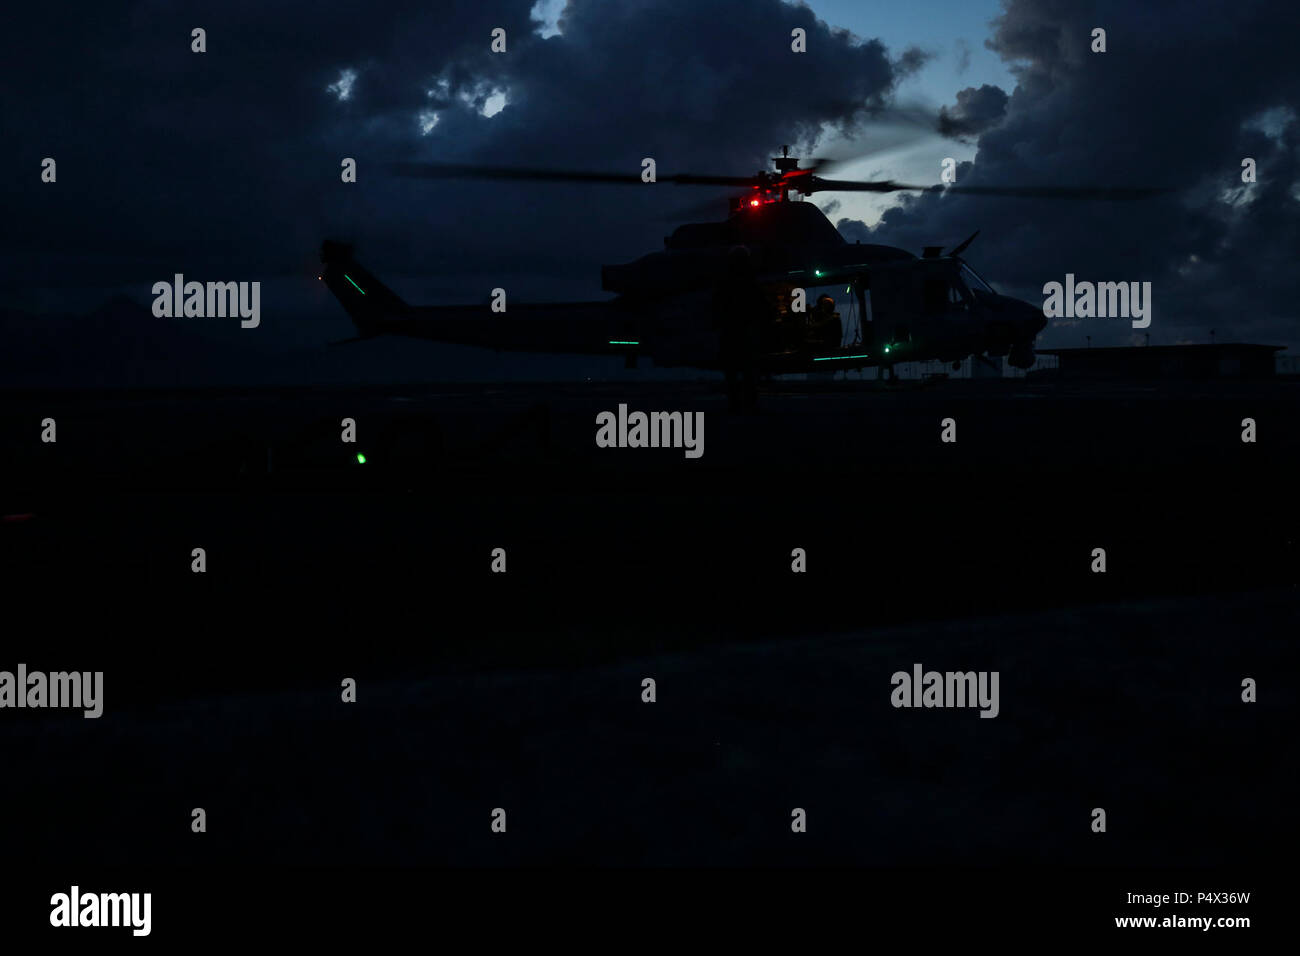 A U.S. Marine Corps UH-1Y Huey assigned to Marine Light Attack Helicopter Squadron 367 hovers over the ground at Landing Zone Westfield during a joint operation training exercise aboard Marine Corps Air Station Kaneohe Bay on May 10, 2017. The mission of HMLA-367 is to support the Marine Air-Ground Task Force commander by providing offensive air support, armed escort and airborne supporting arms coordination, day or night, under all weather conditions during expeditionary, joint, or combined operations. Stock Photo